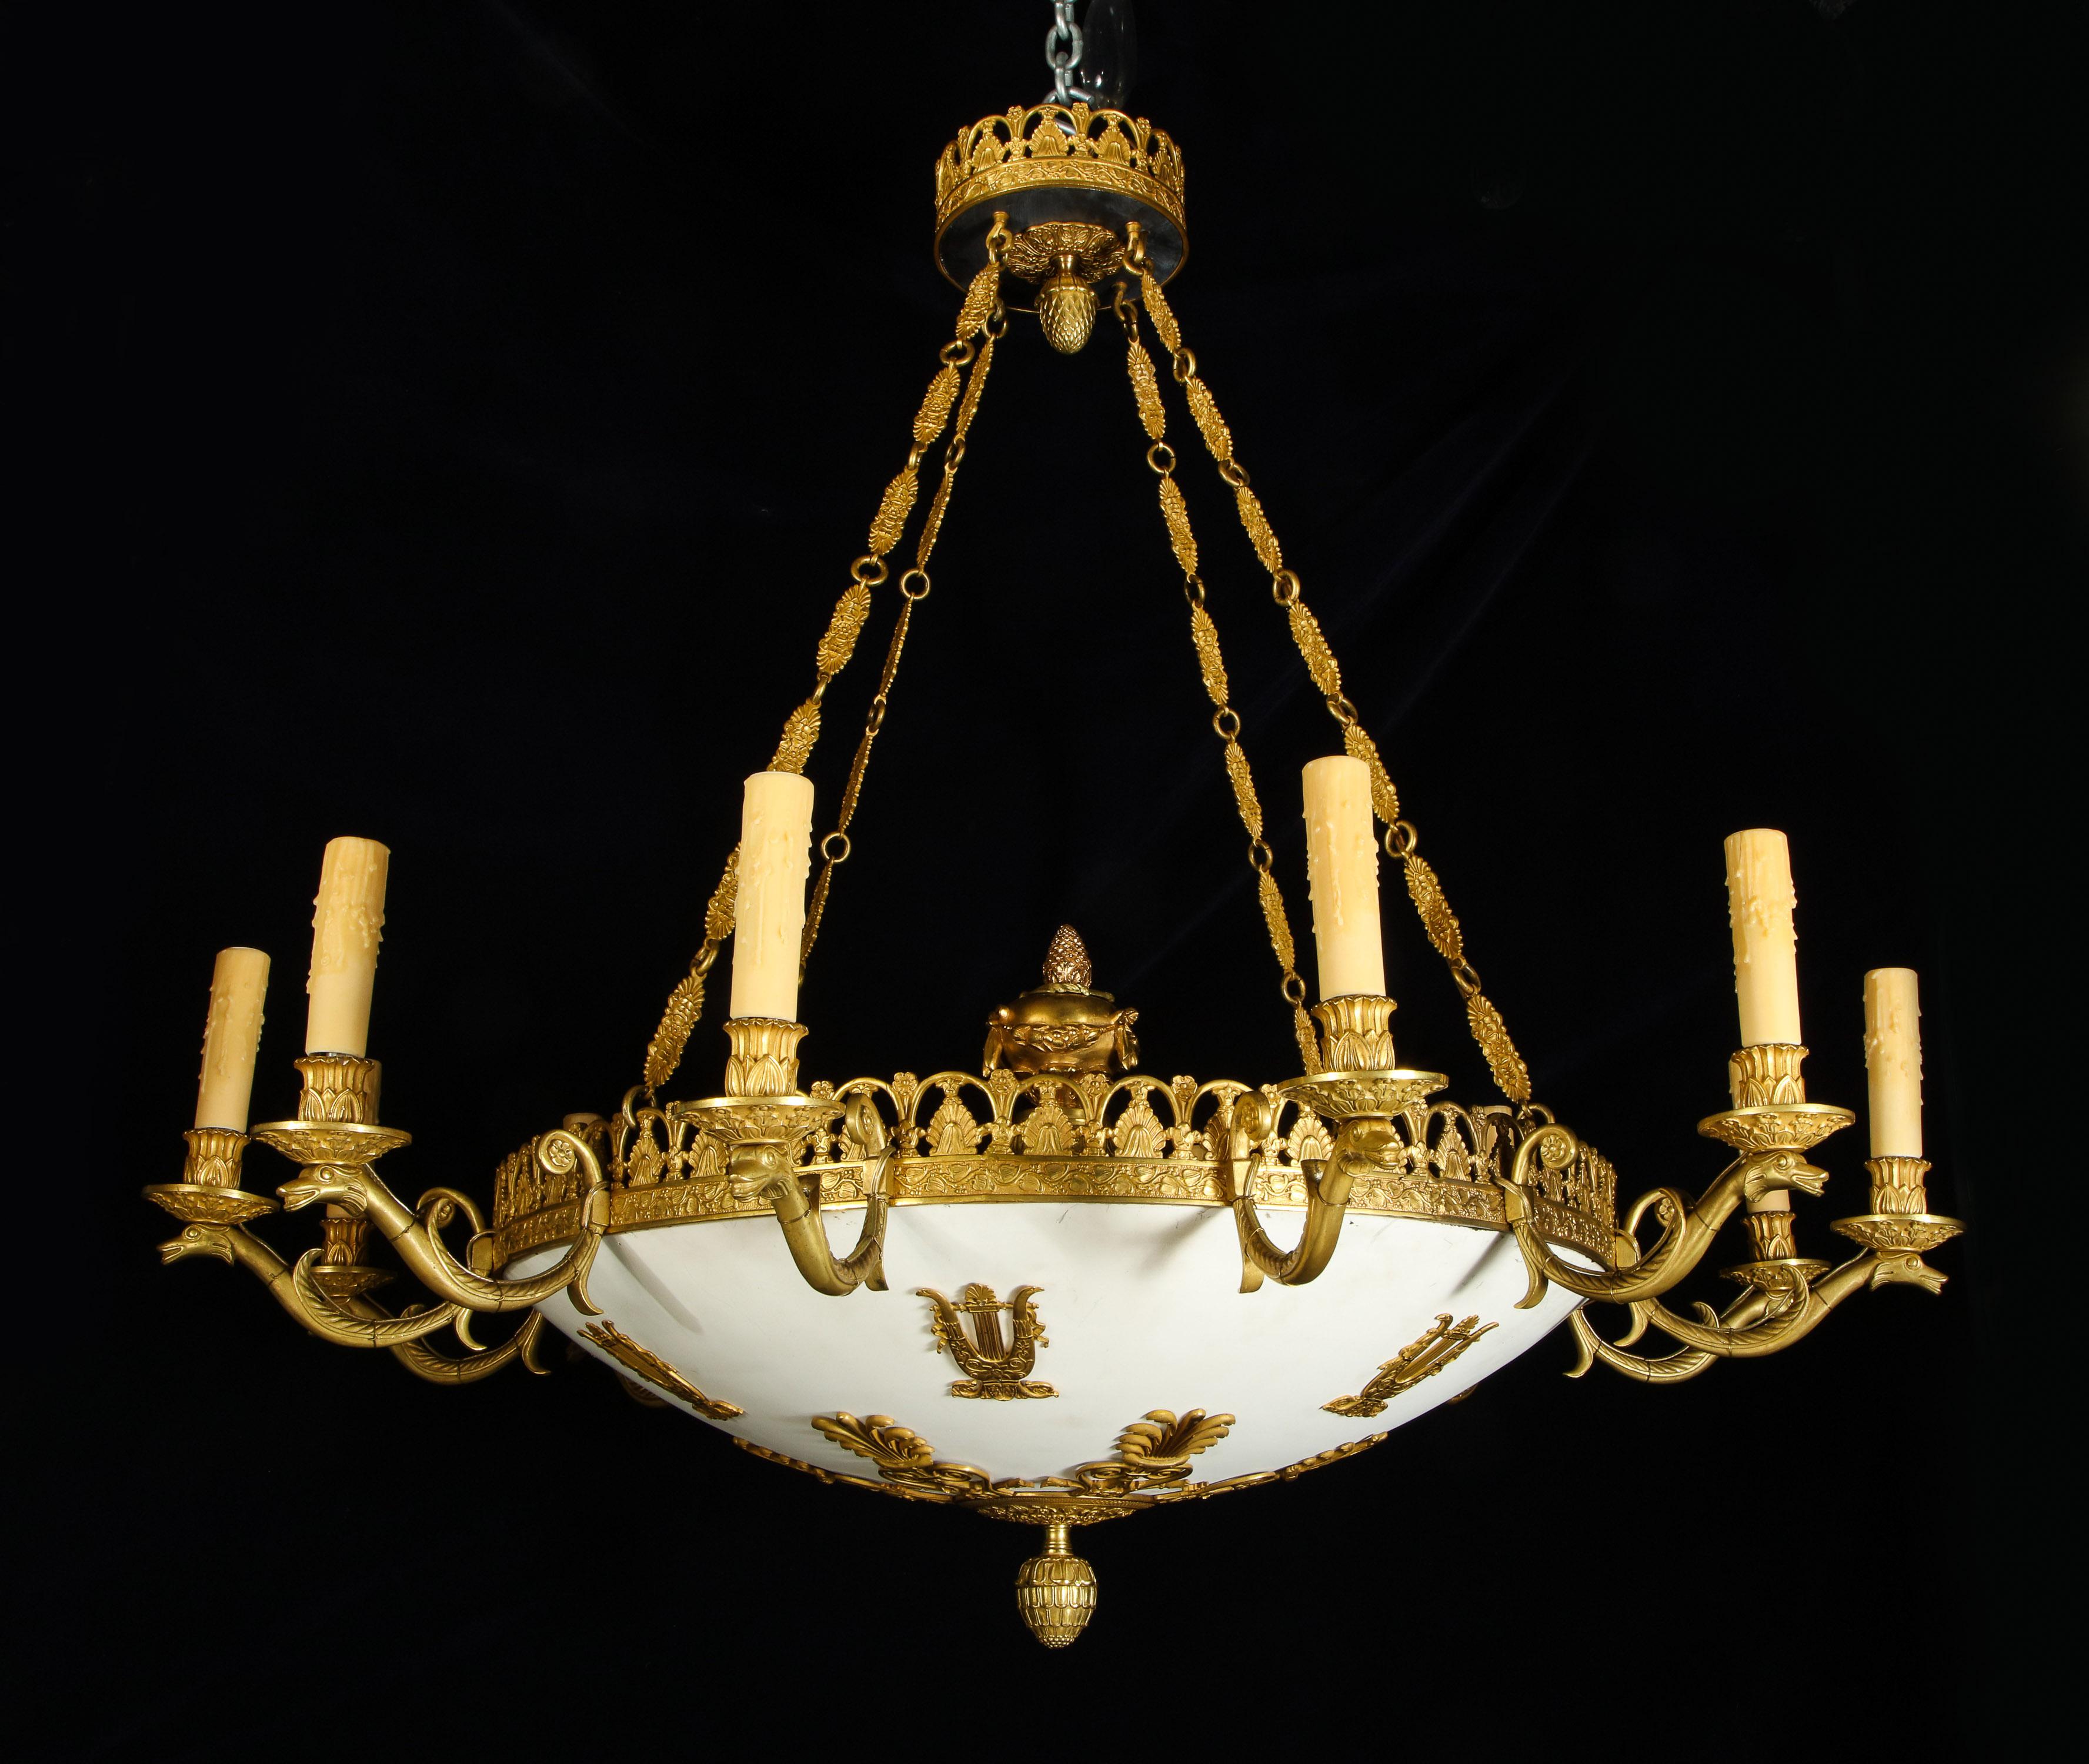 Pair of Large and Important Antique French Empire Gilt Bronze Chandeliers For Sale 11